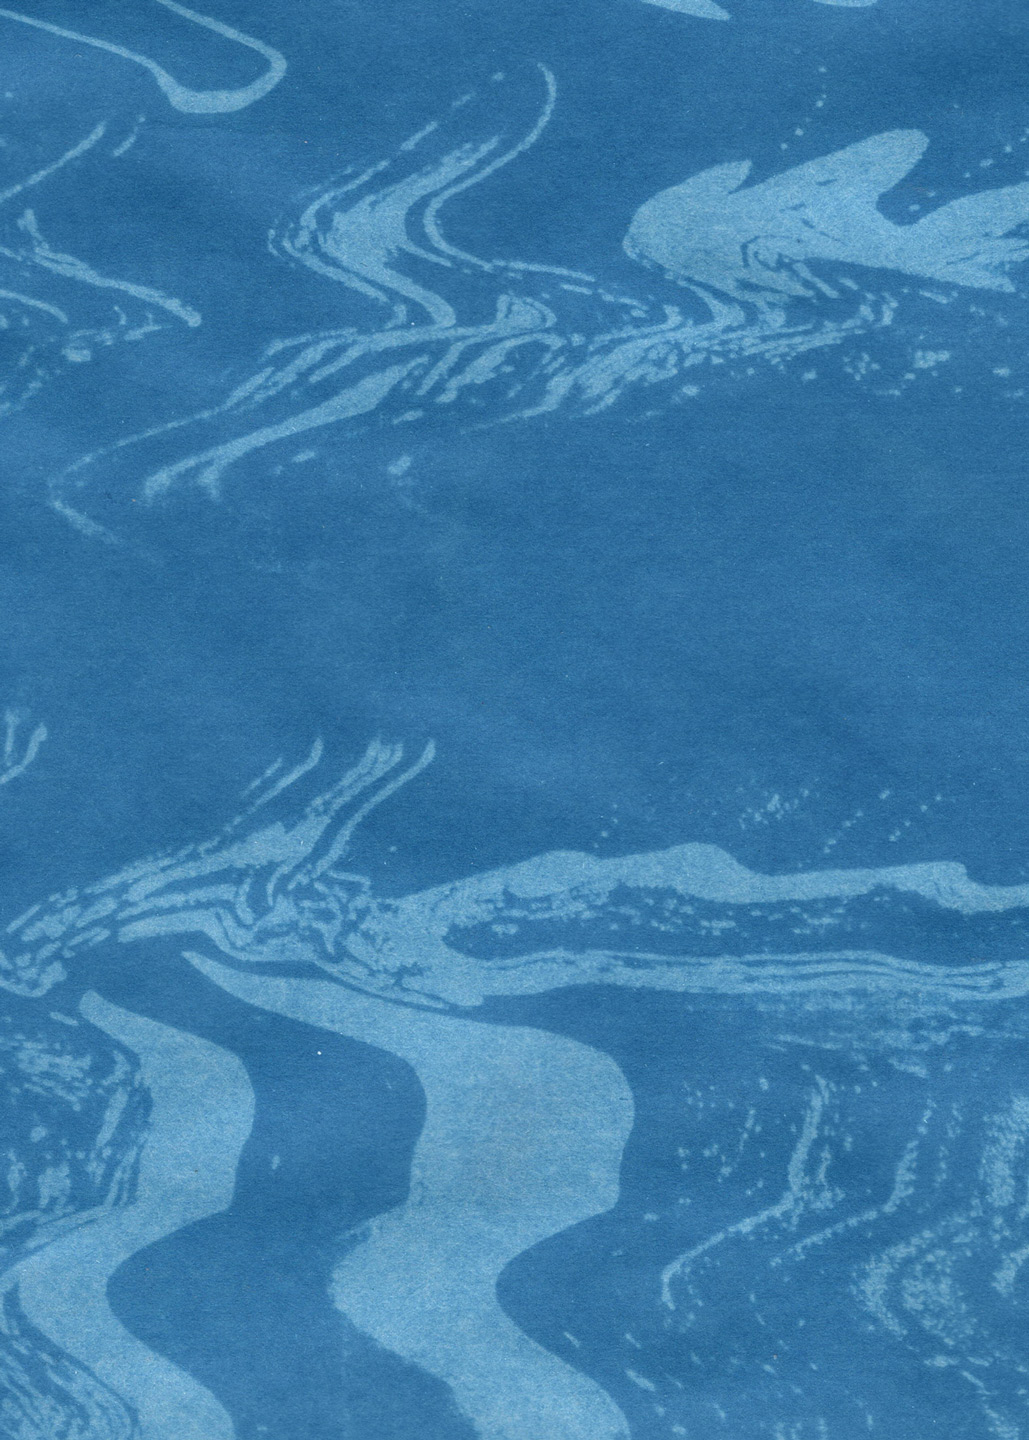 A cyanotype created from the Nature/Contortion scanograph piece. The dark blue background and lighter blue abstract shapes create a sense of flowing water.